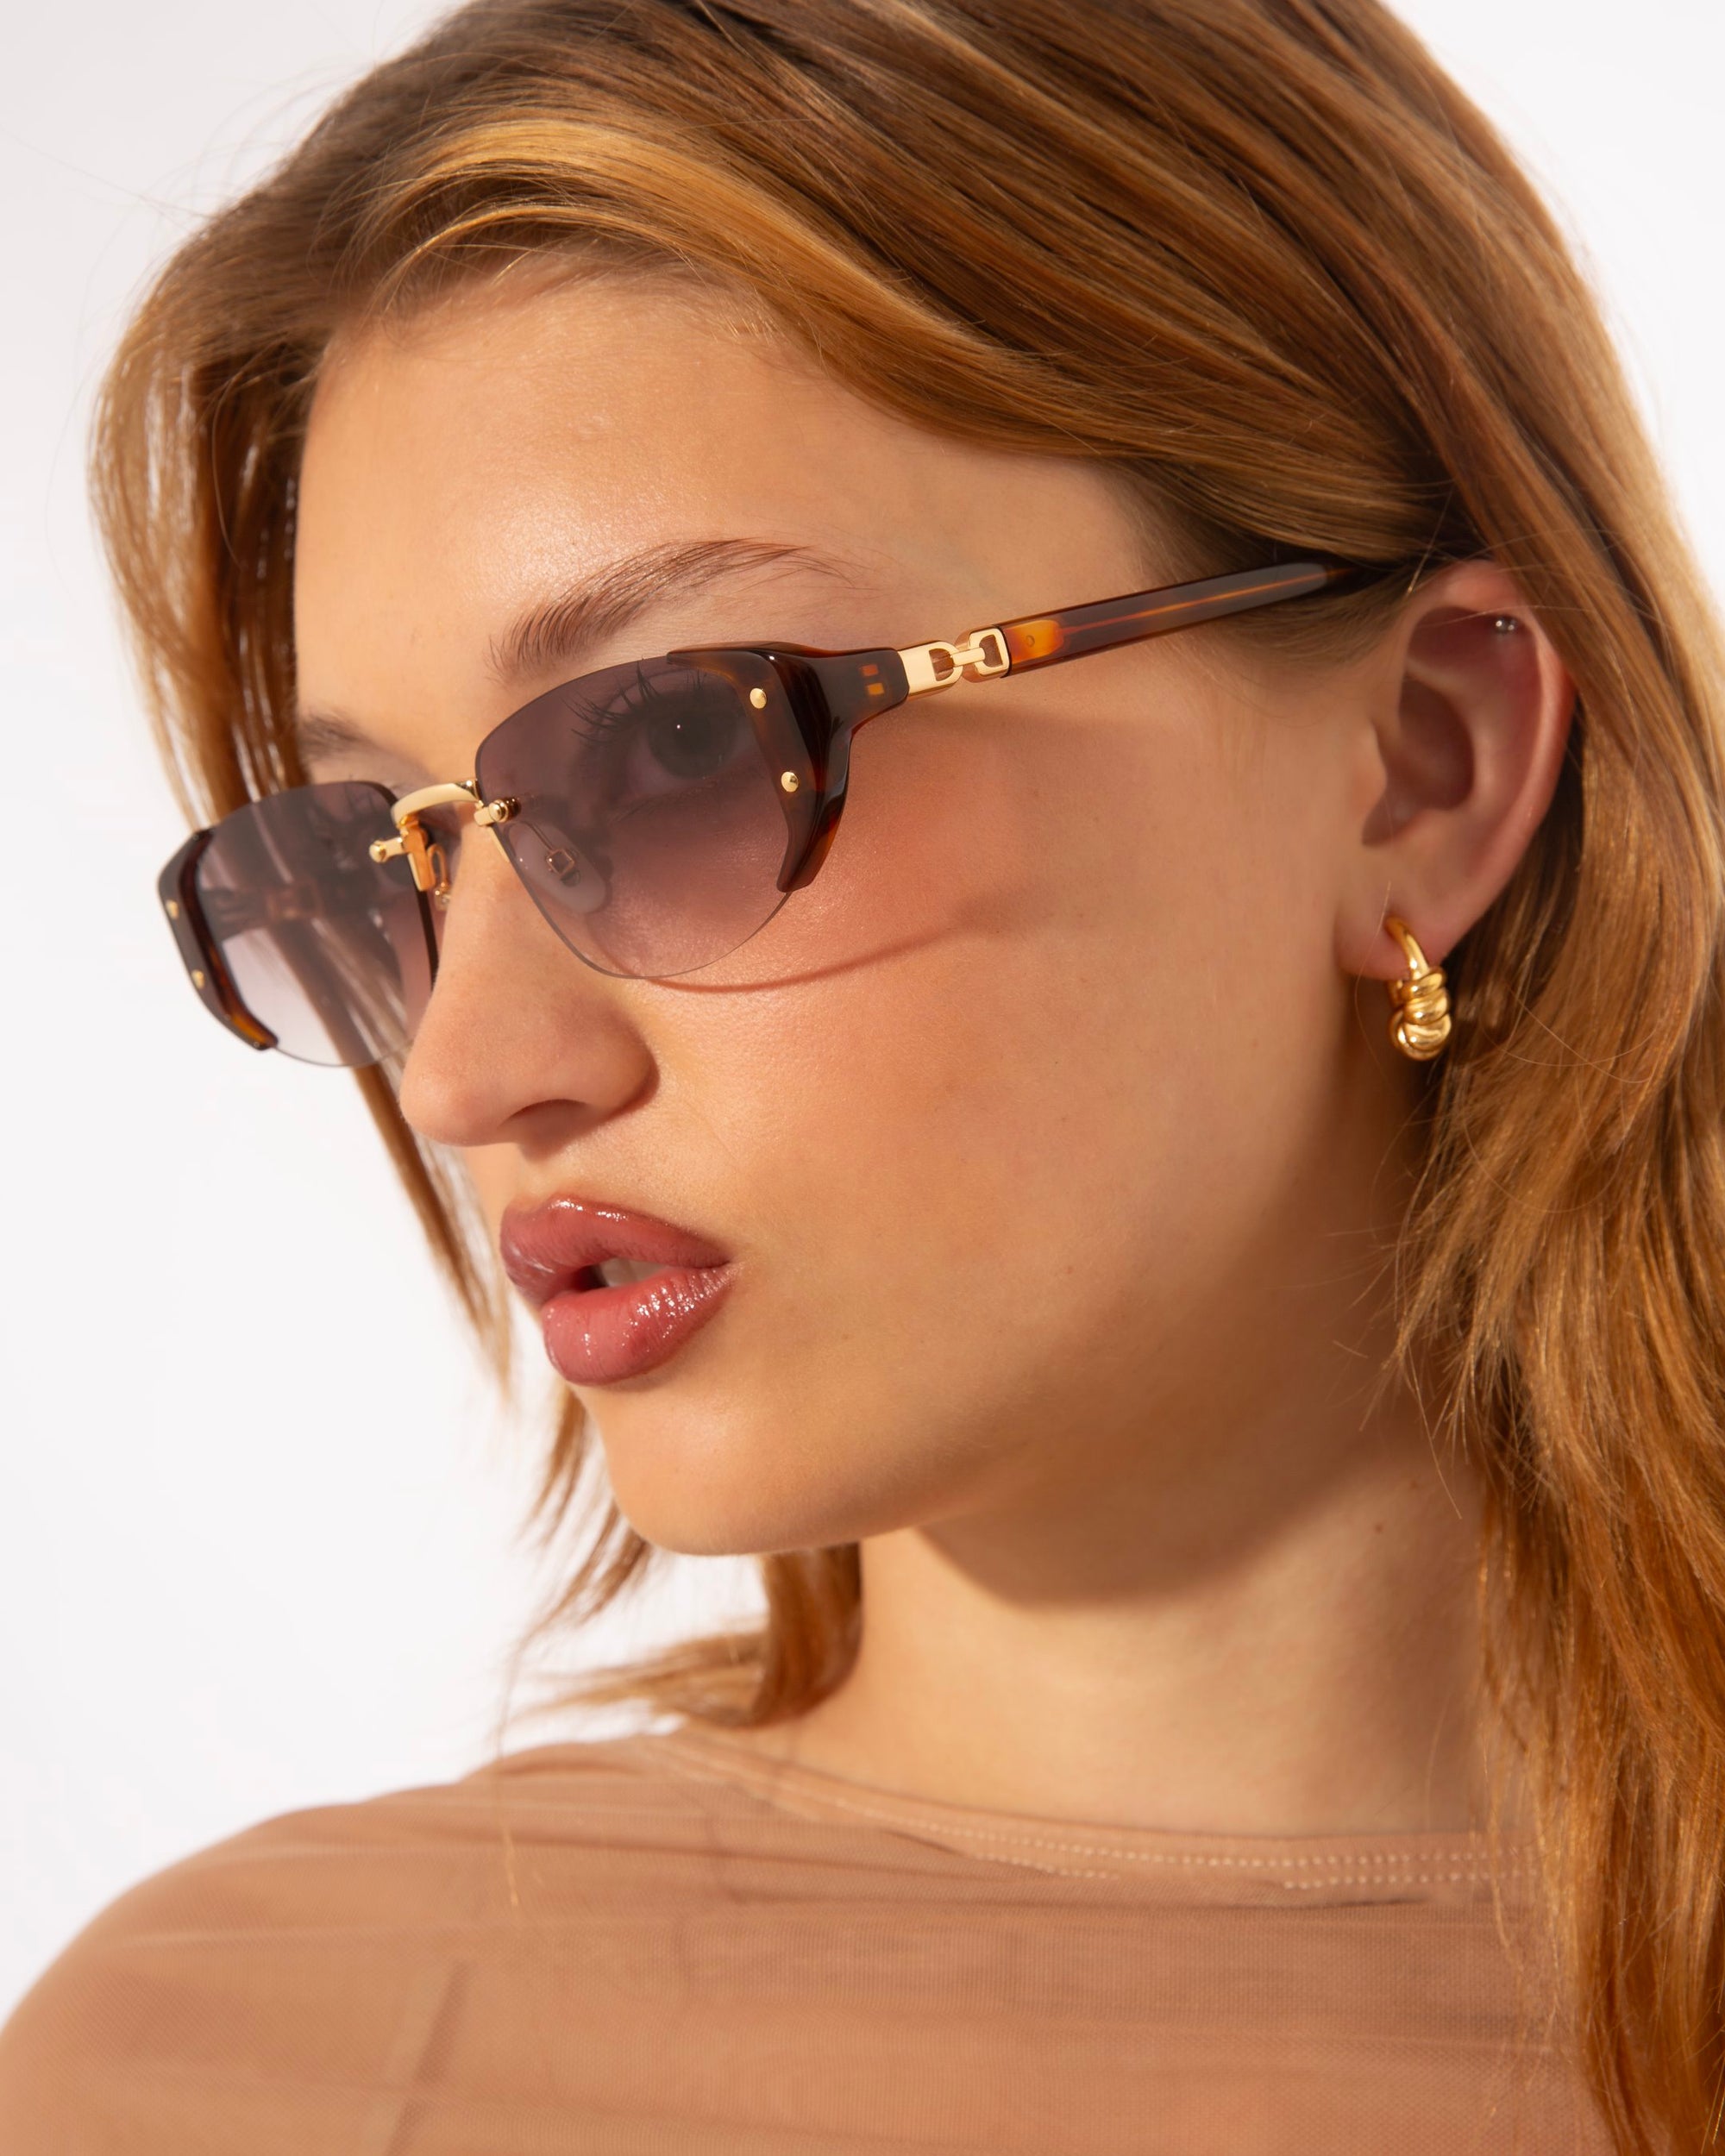 A woman with long, light brown hair is wearing stylish For Art's Sake® Harbour sunglasses featuring retro-inspired design with gold accents and small hoop earrings. She is dressed in a sheer, nude-colored top. The background is plain white, emphasizing her fashion accessories.